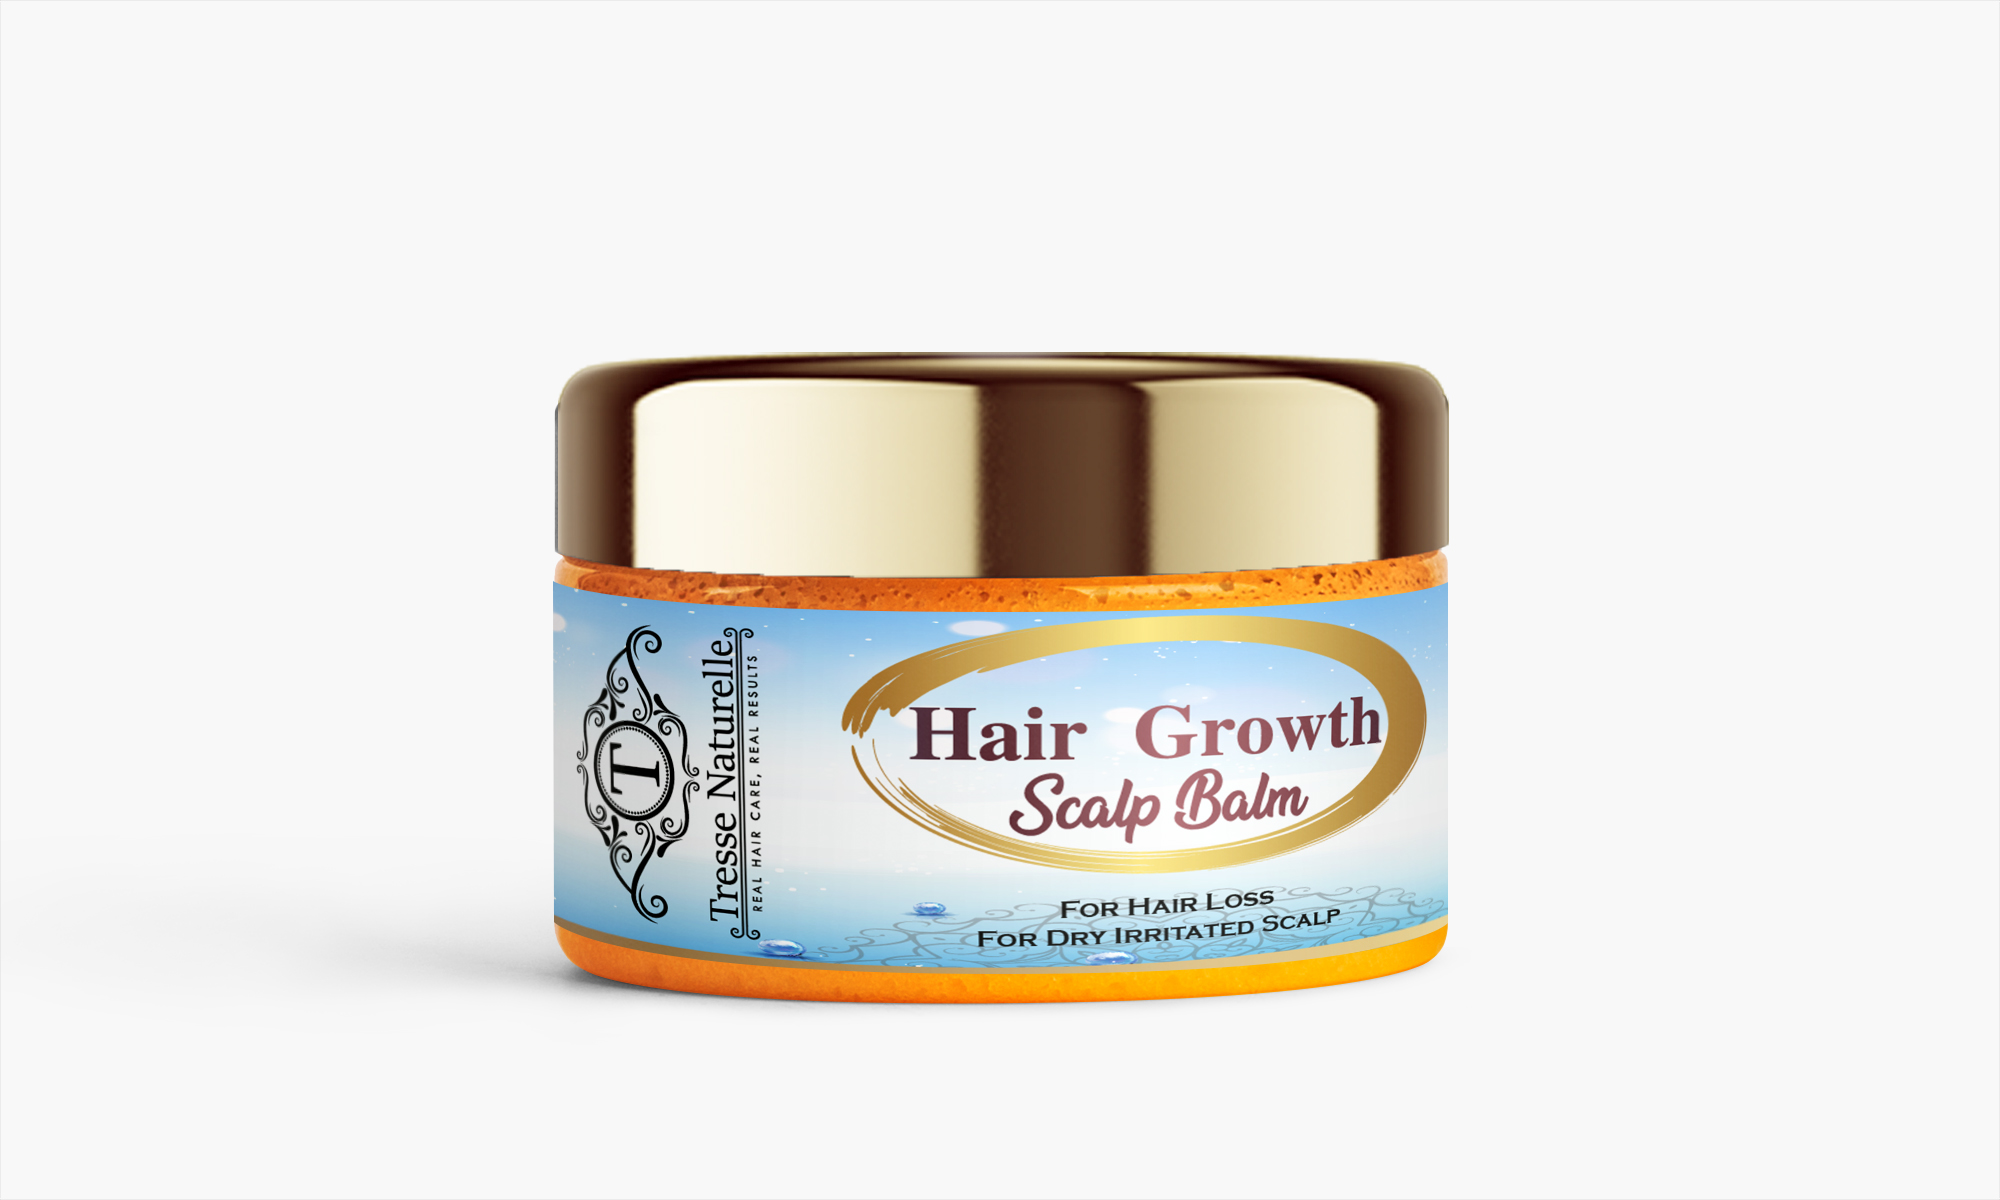 Hair Growth Scalp Balm - Tresse Naturelle Natural Hair Care Products